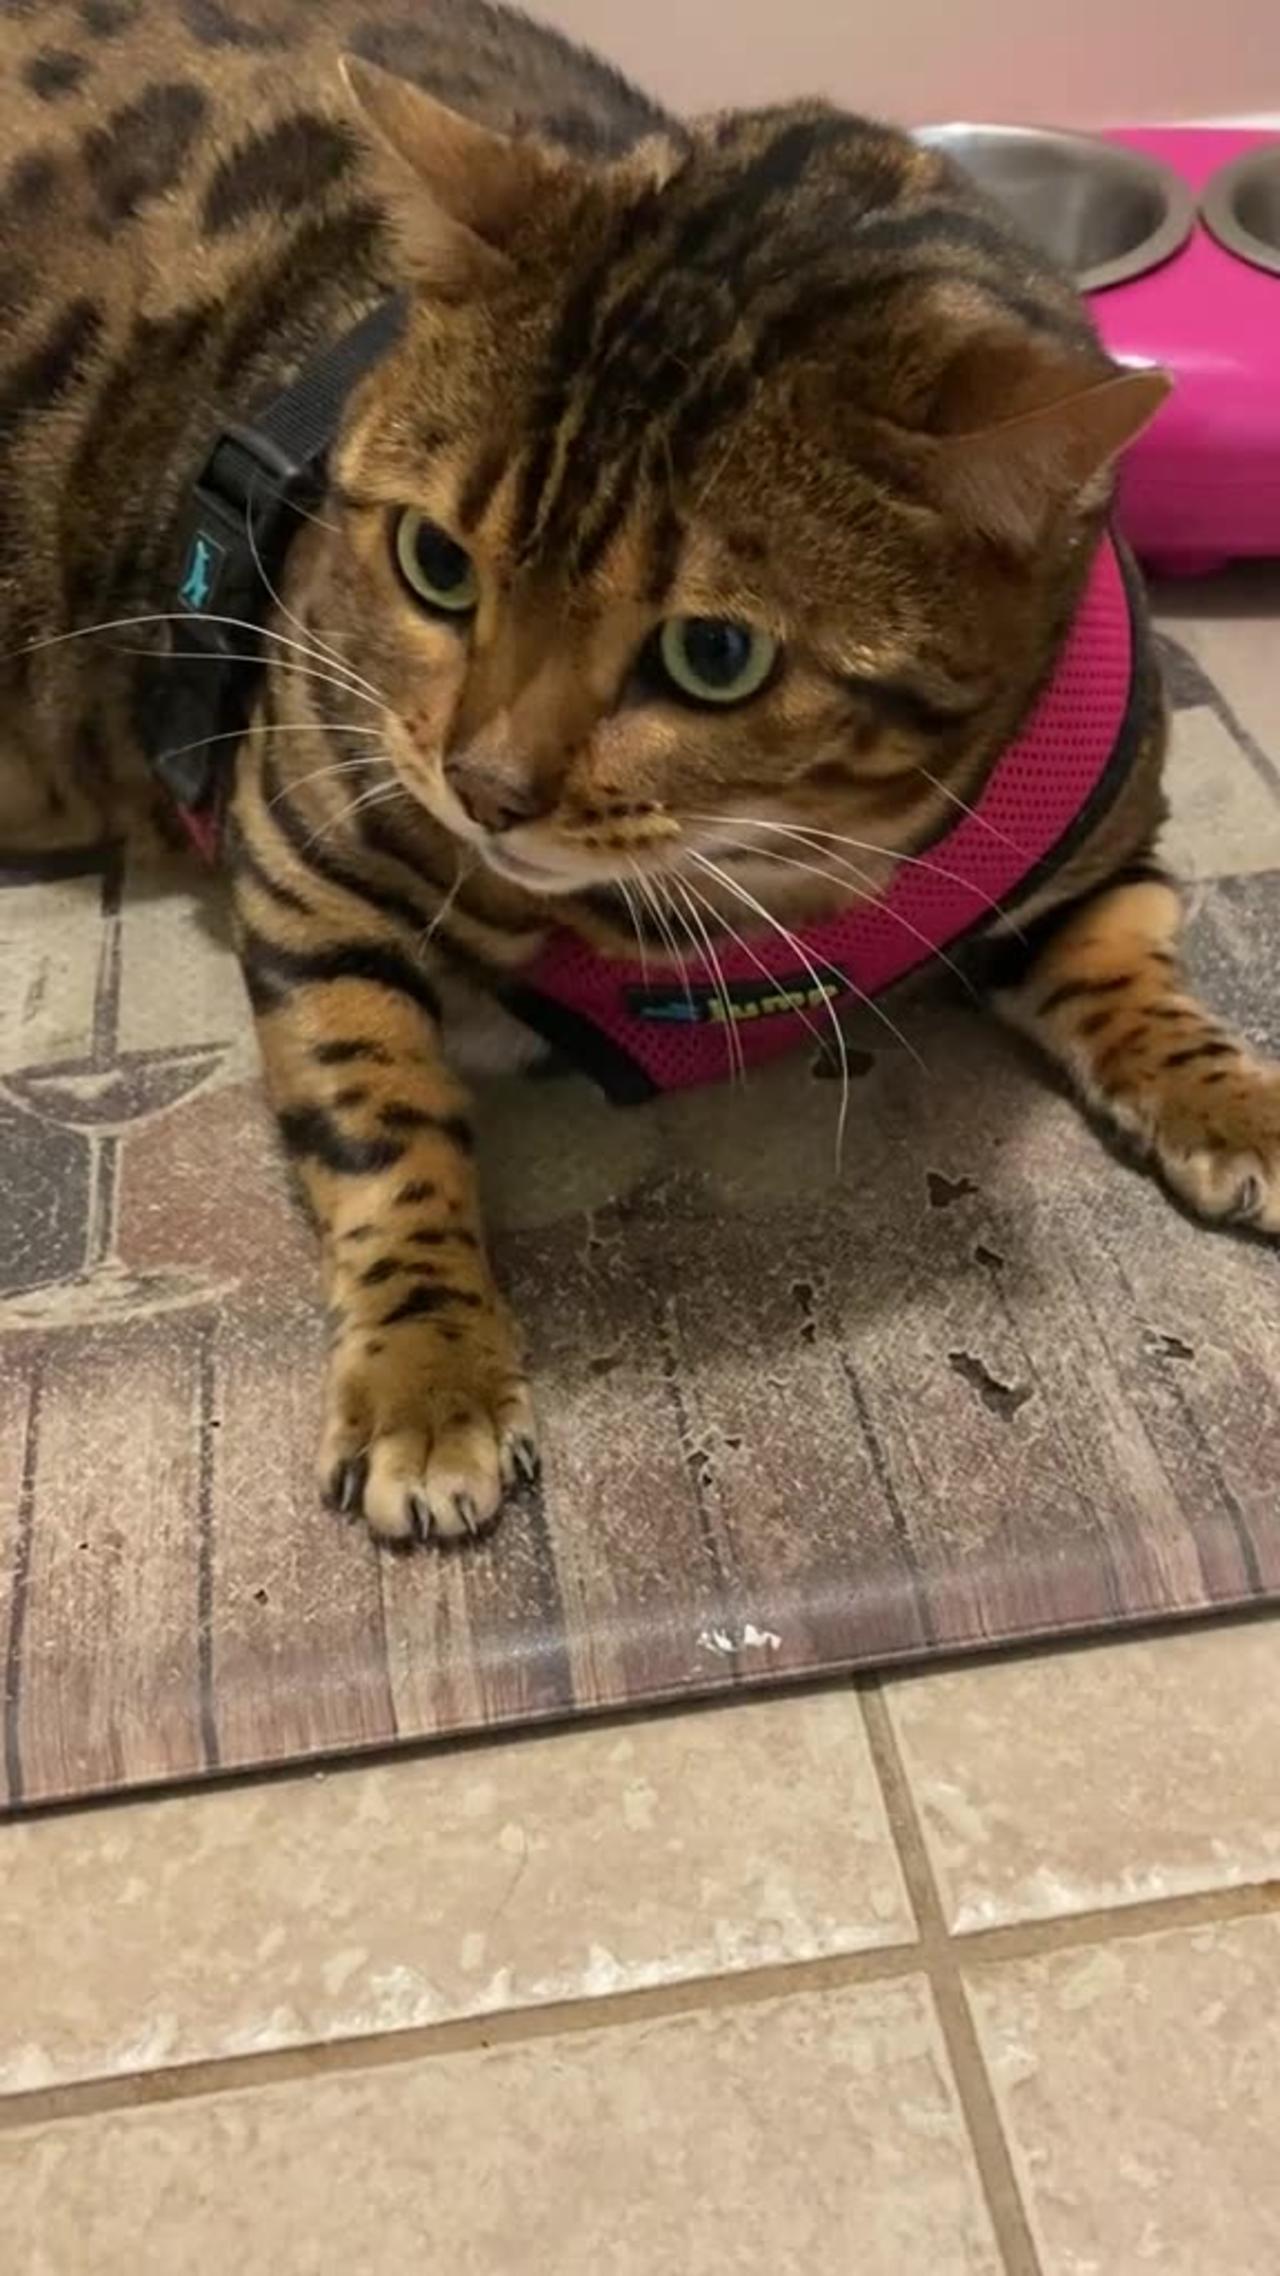 Cat has a hilarious reaction to wearing harness for the first time